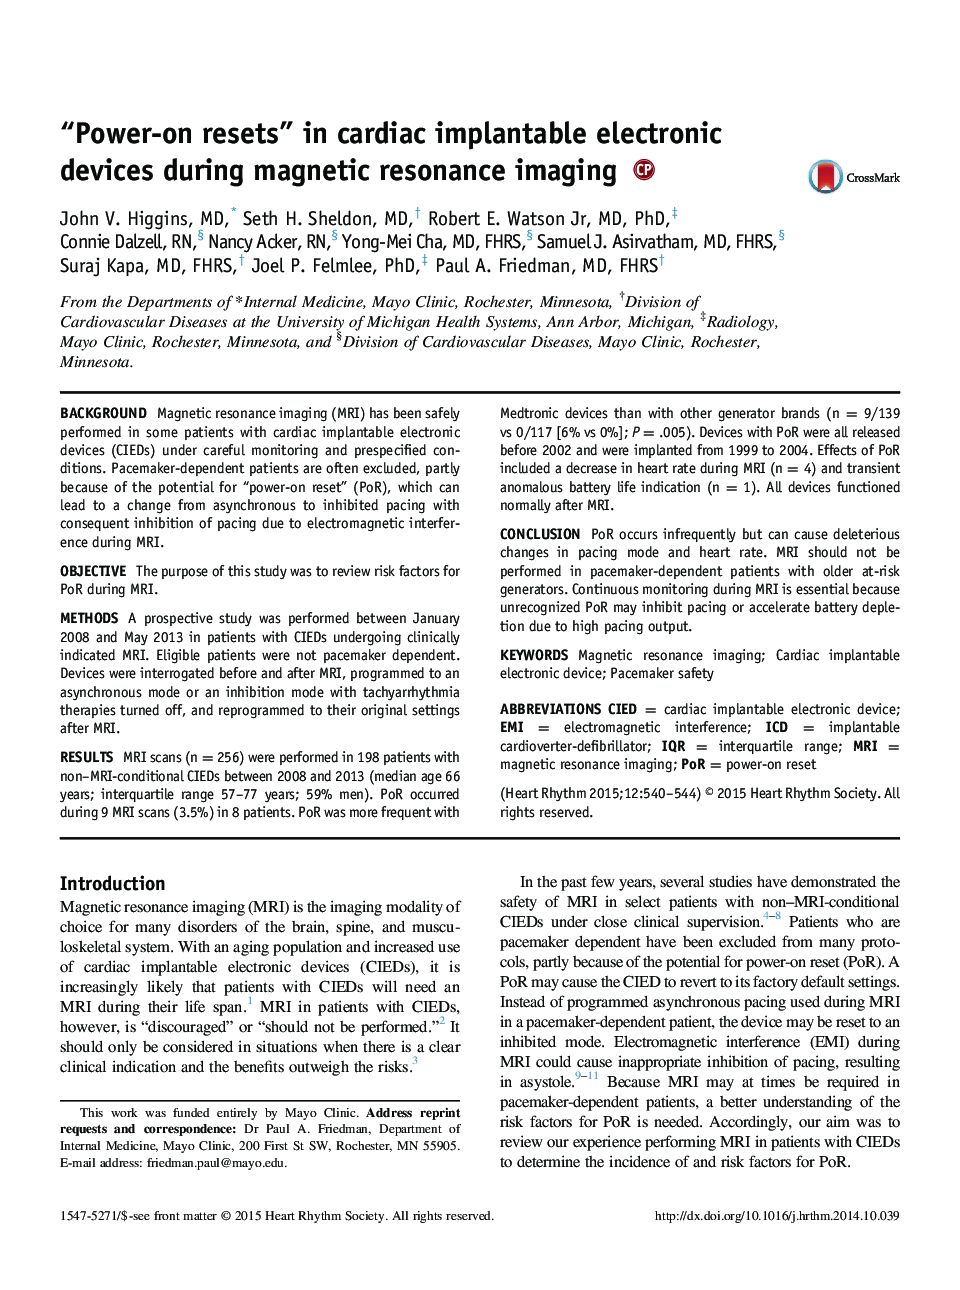 “Power-on resets” in cardiac implantable electronic devices during magnetic resonance imaging 